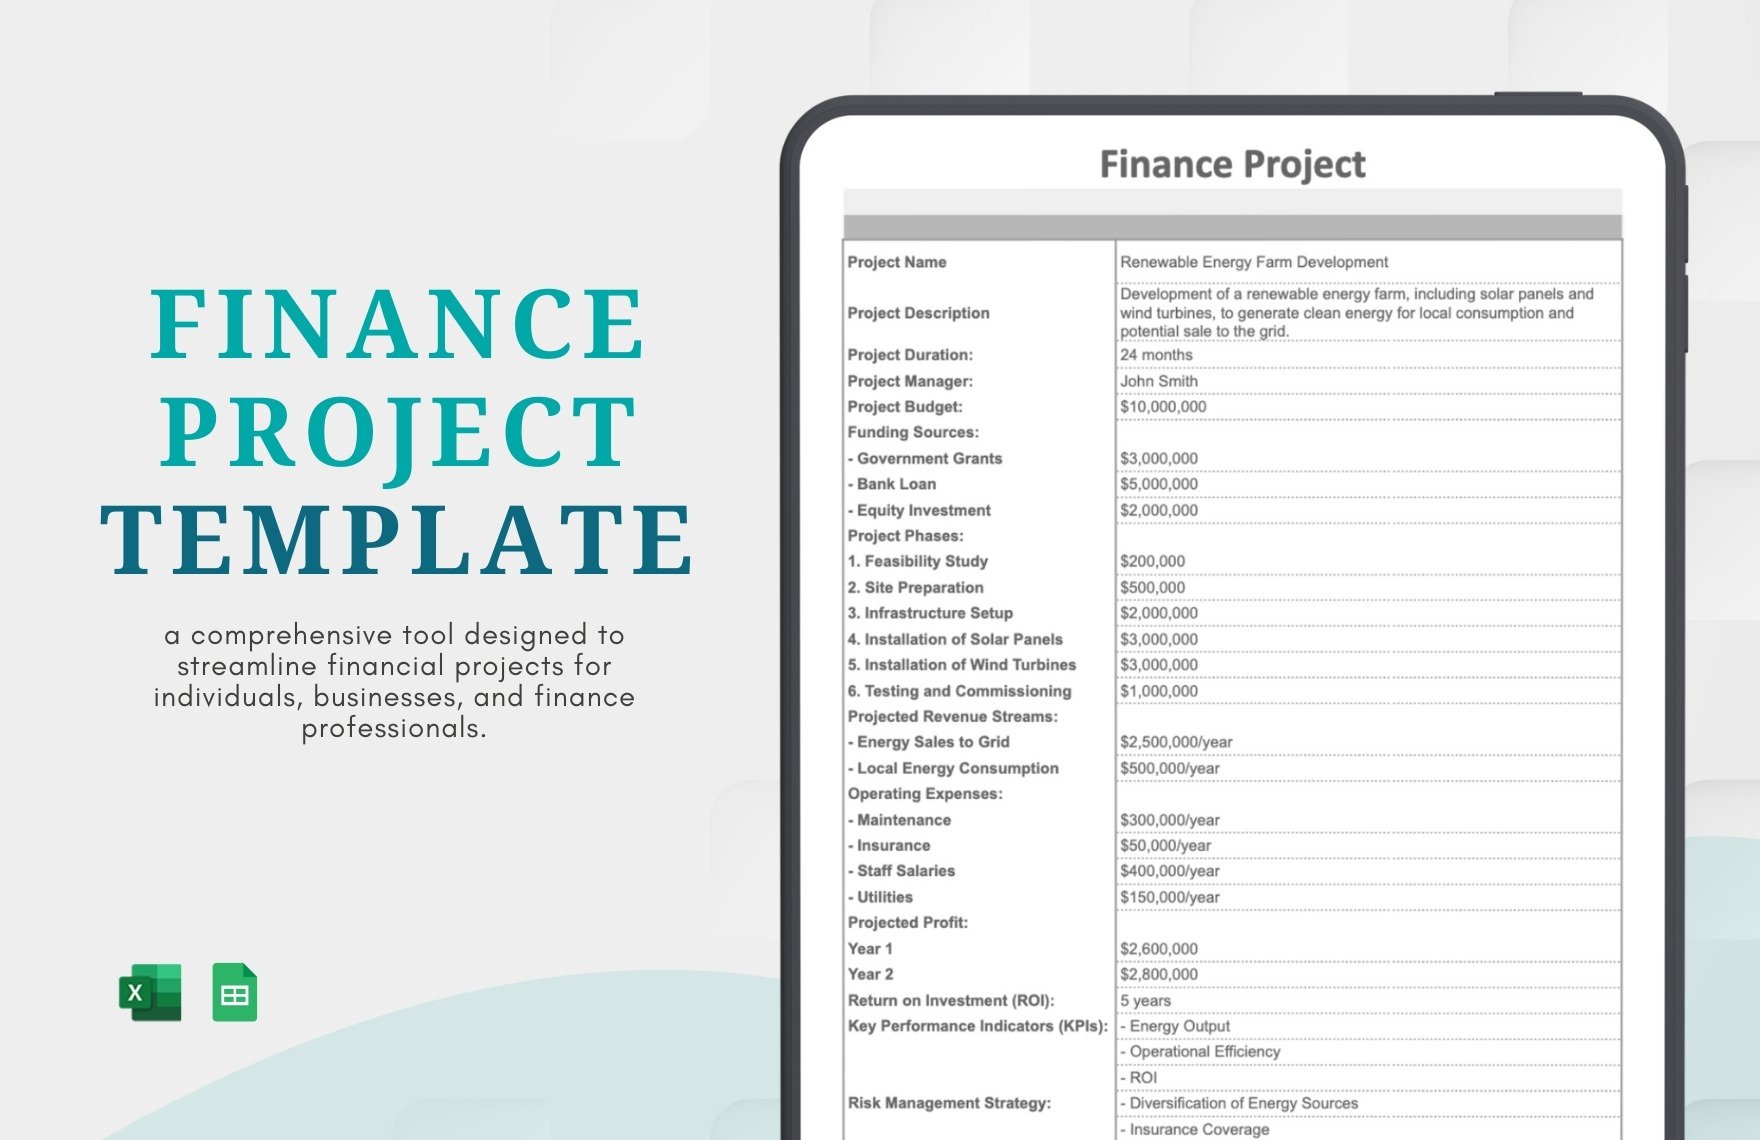 Finance Project Template